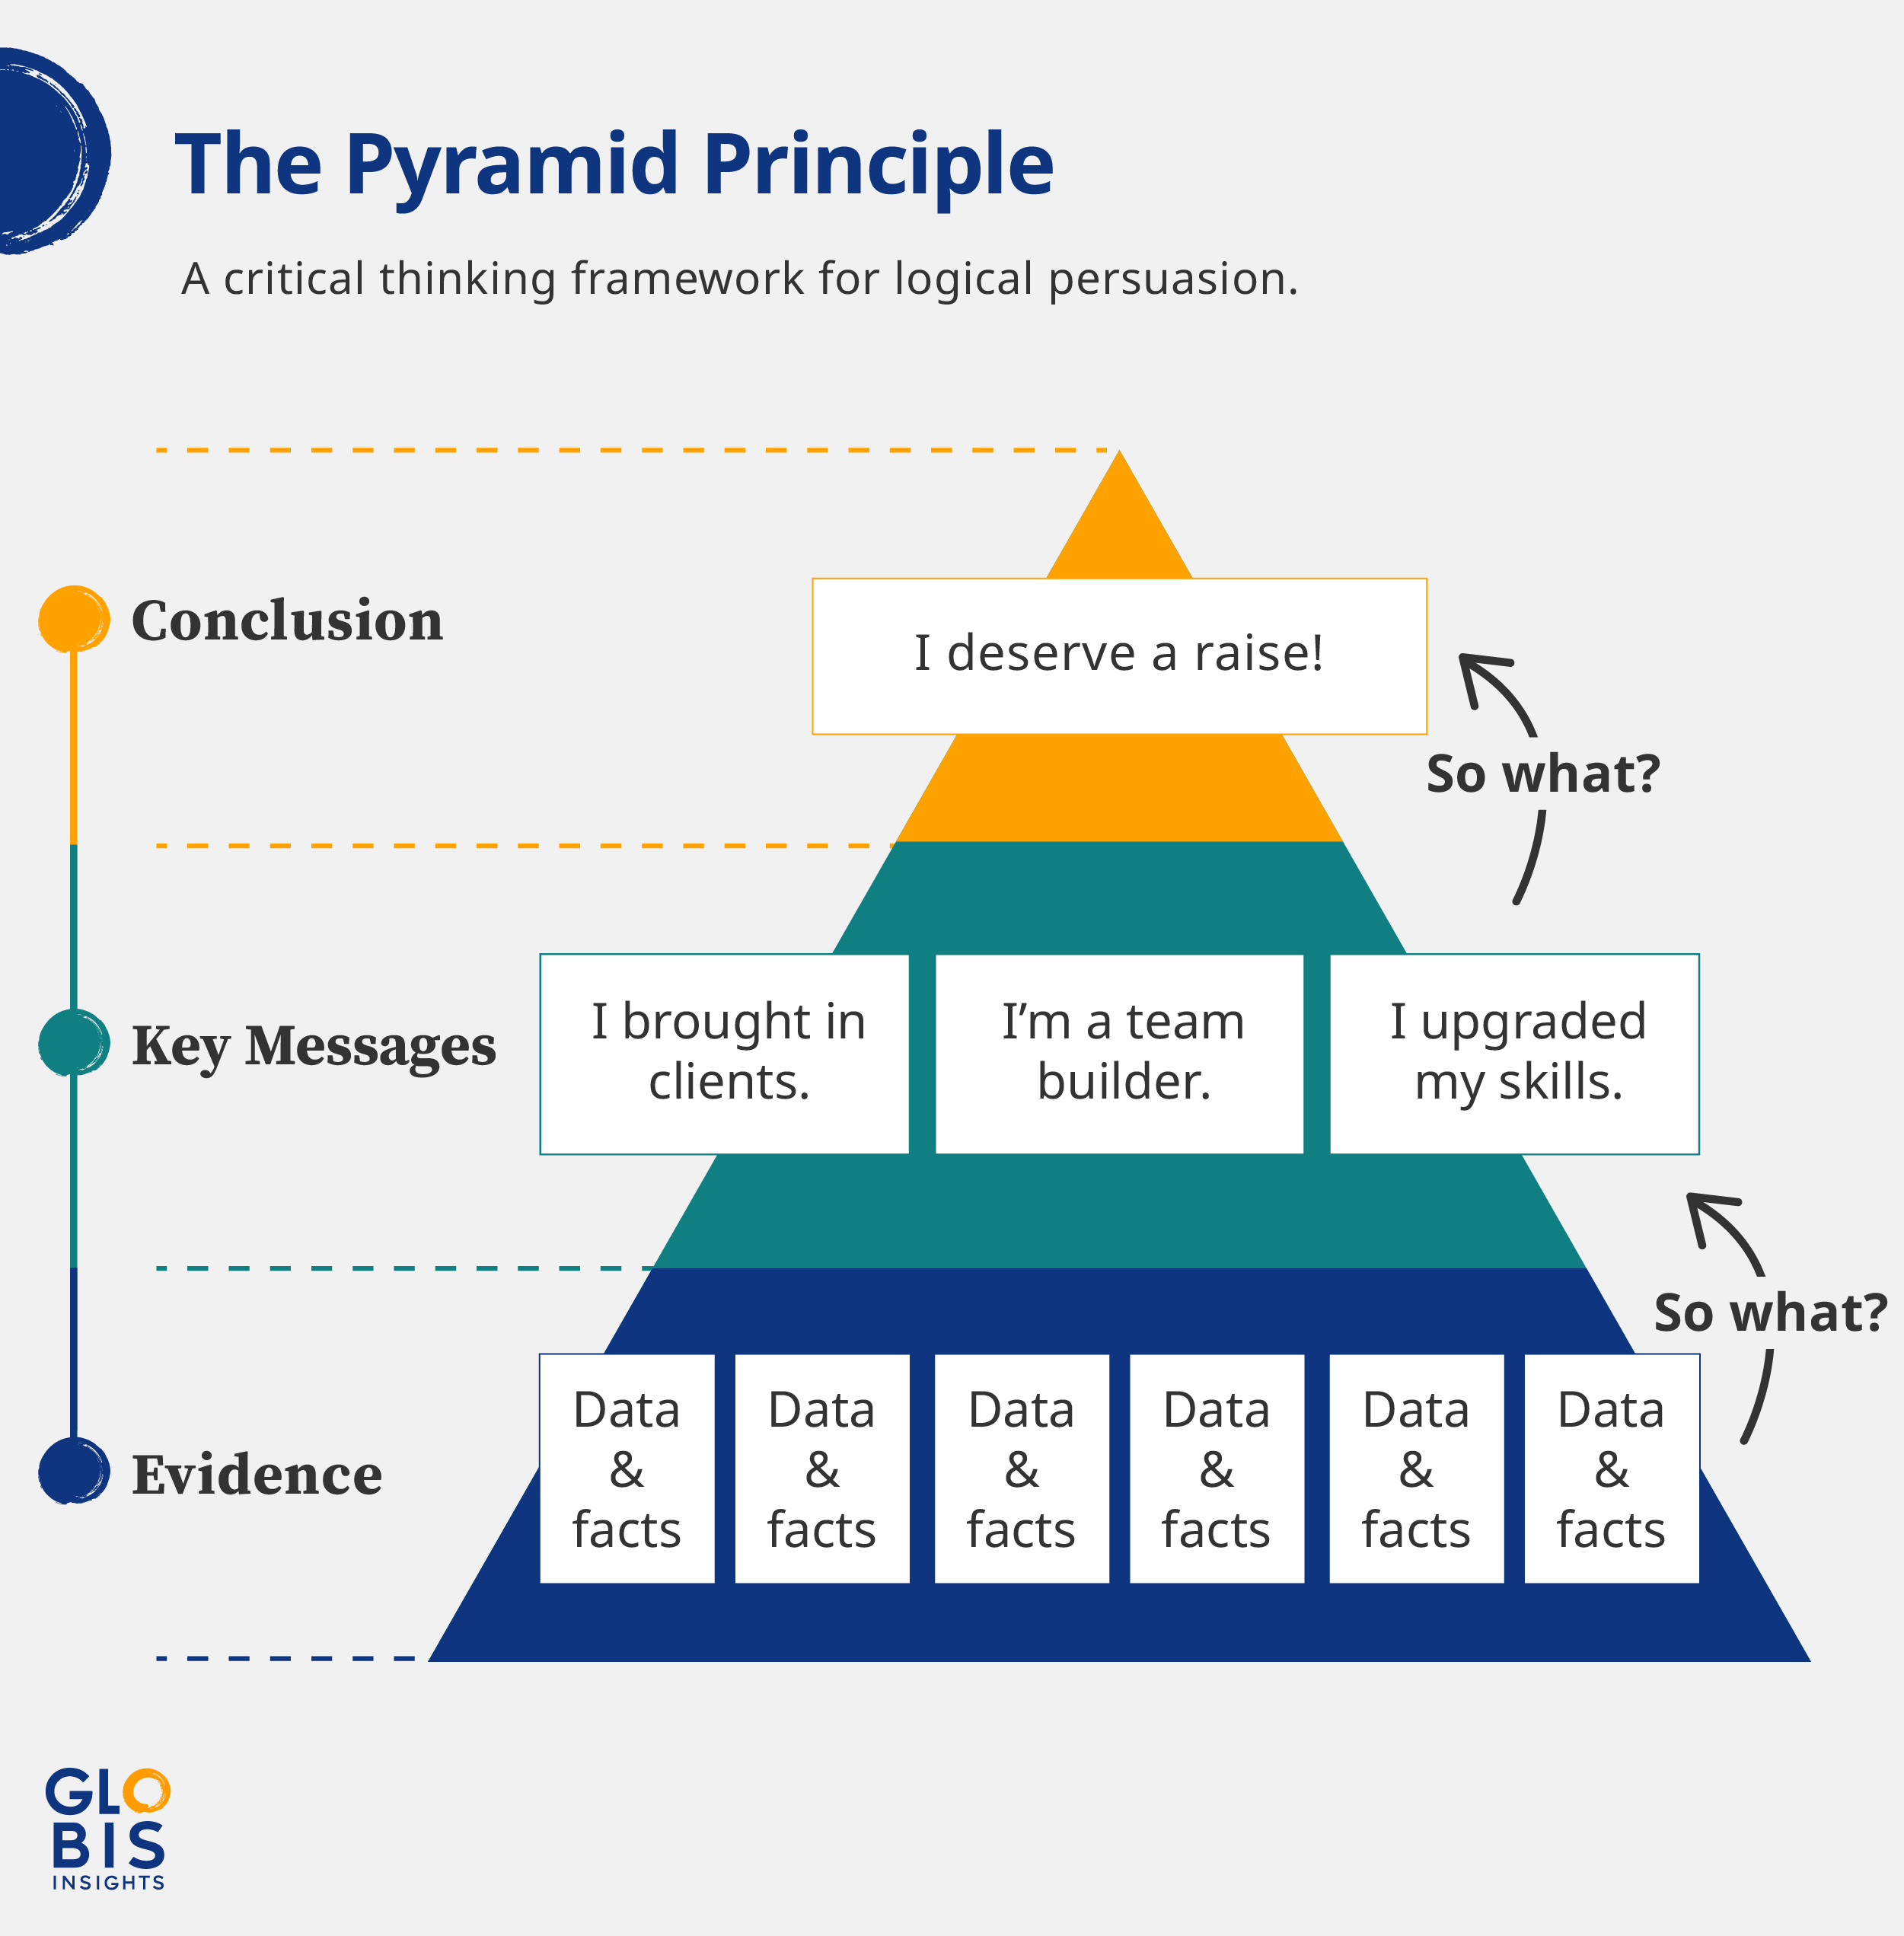 An infographic demonstrating how to use Barbara Minto's Pyramid Principle to make an argument for a raise